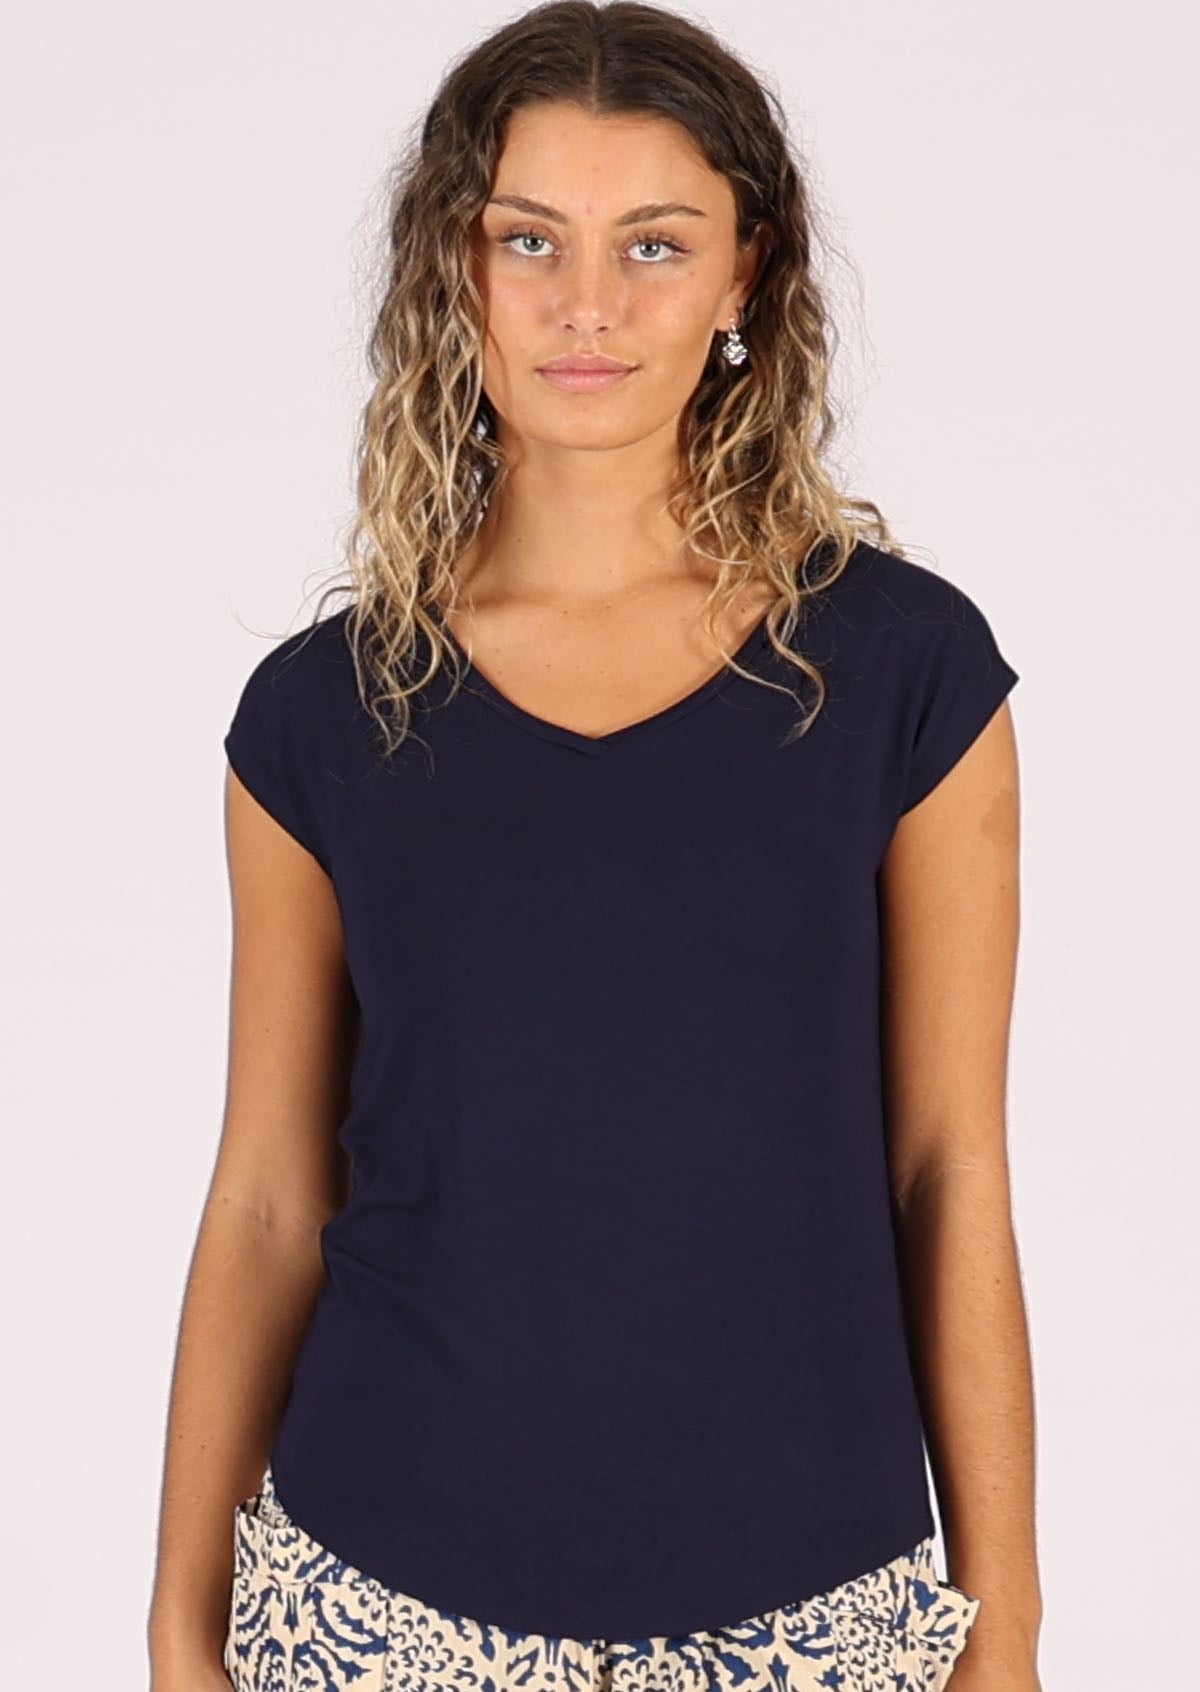 Woman wearing a navy blue v-neck short cap sleeve rayon top with floral cream and blue pants.